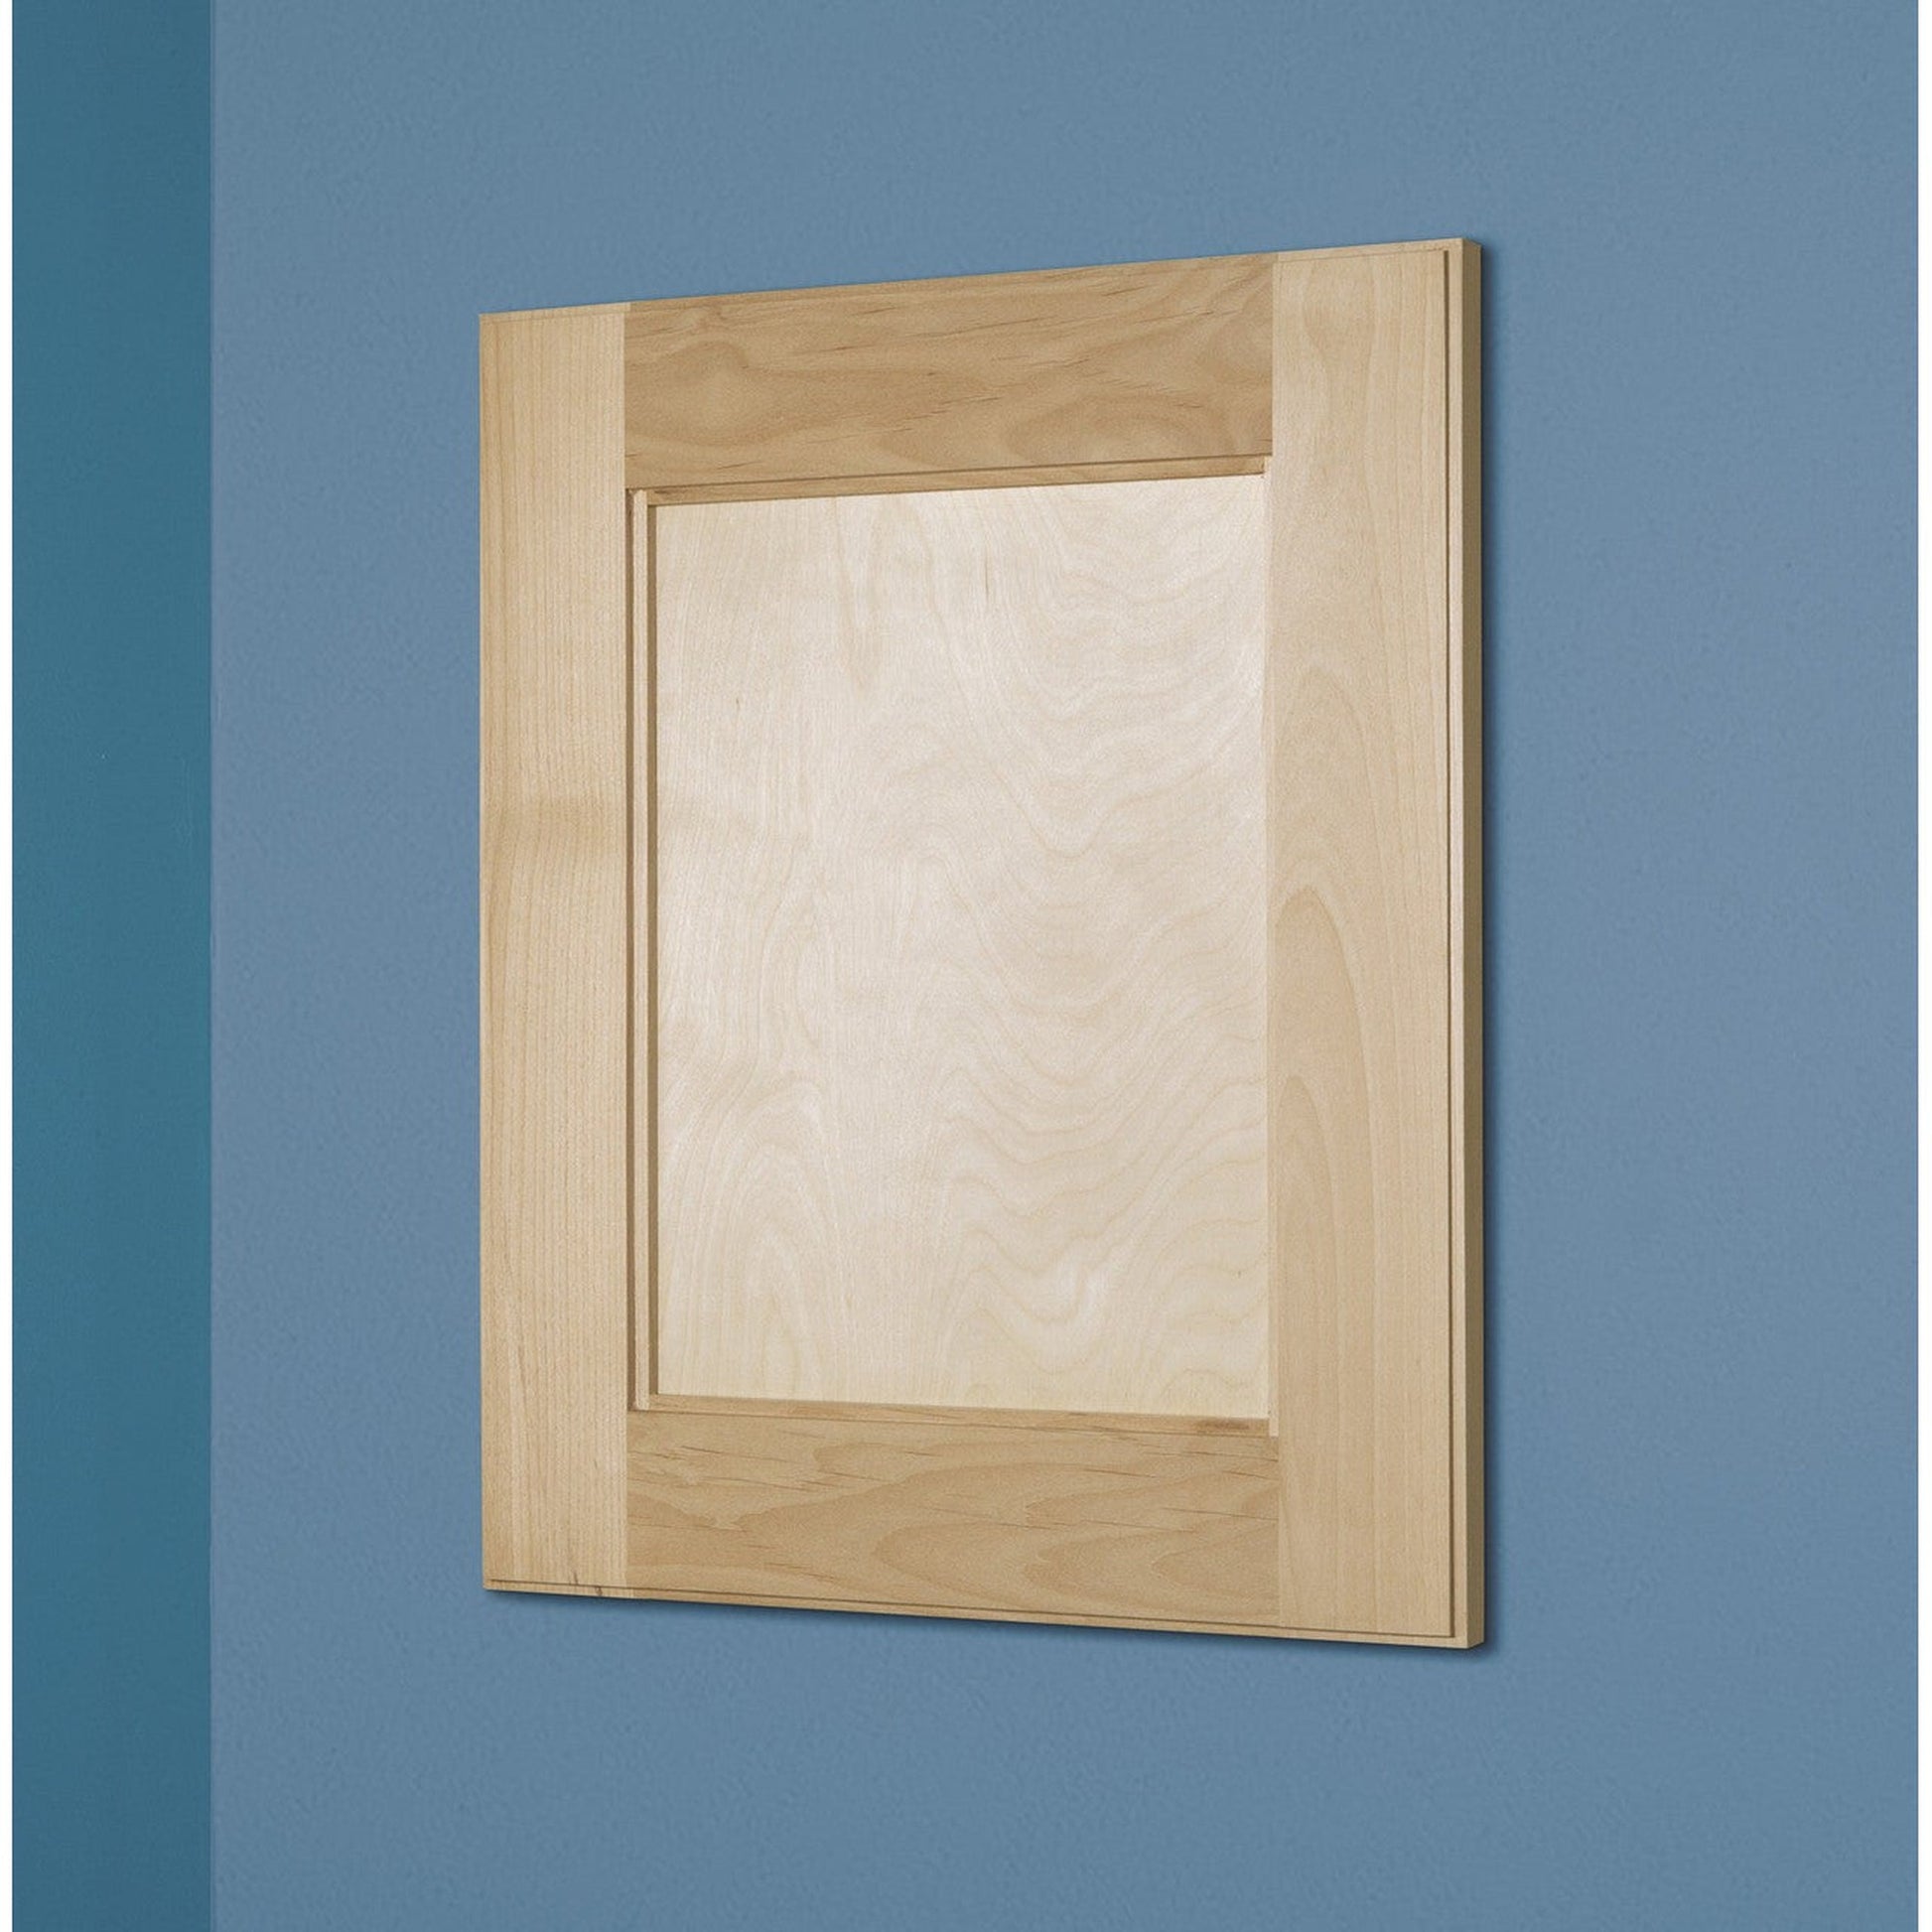 Fox Hollow Furnishings 14" x 18" Unfinished Style Beadboard White Interior Special 6" Depth Recessed Medicine Cabinet